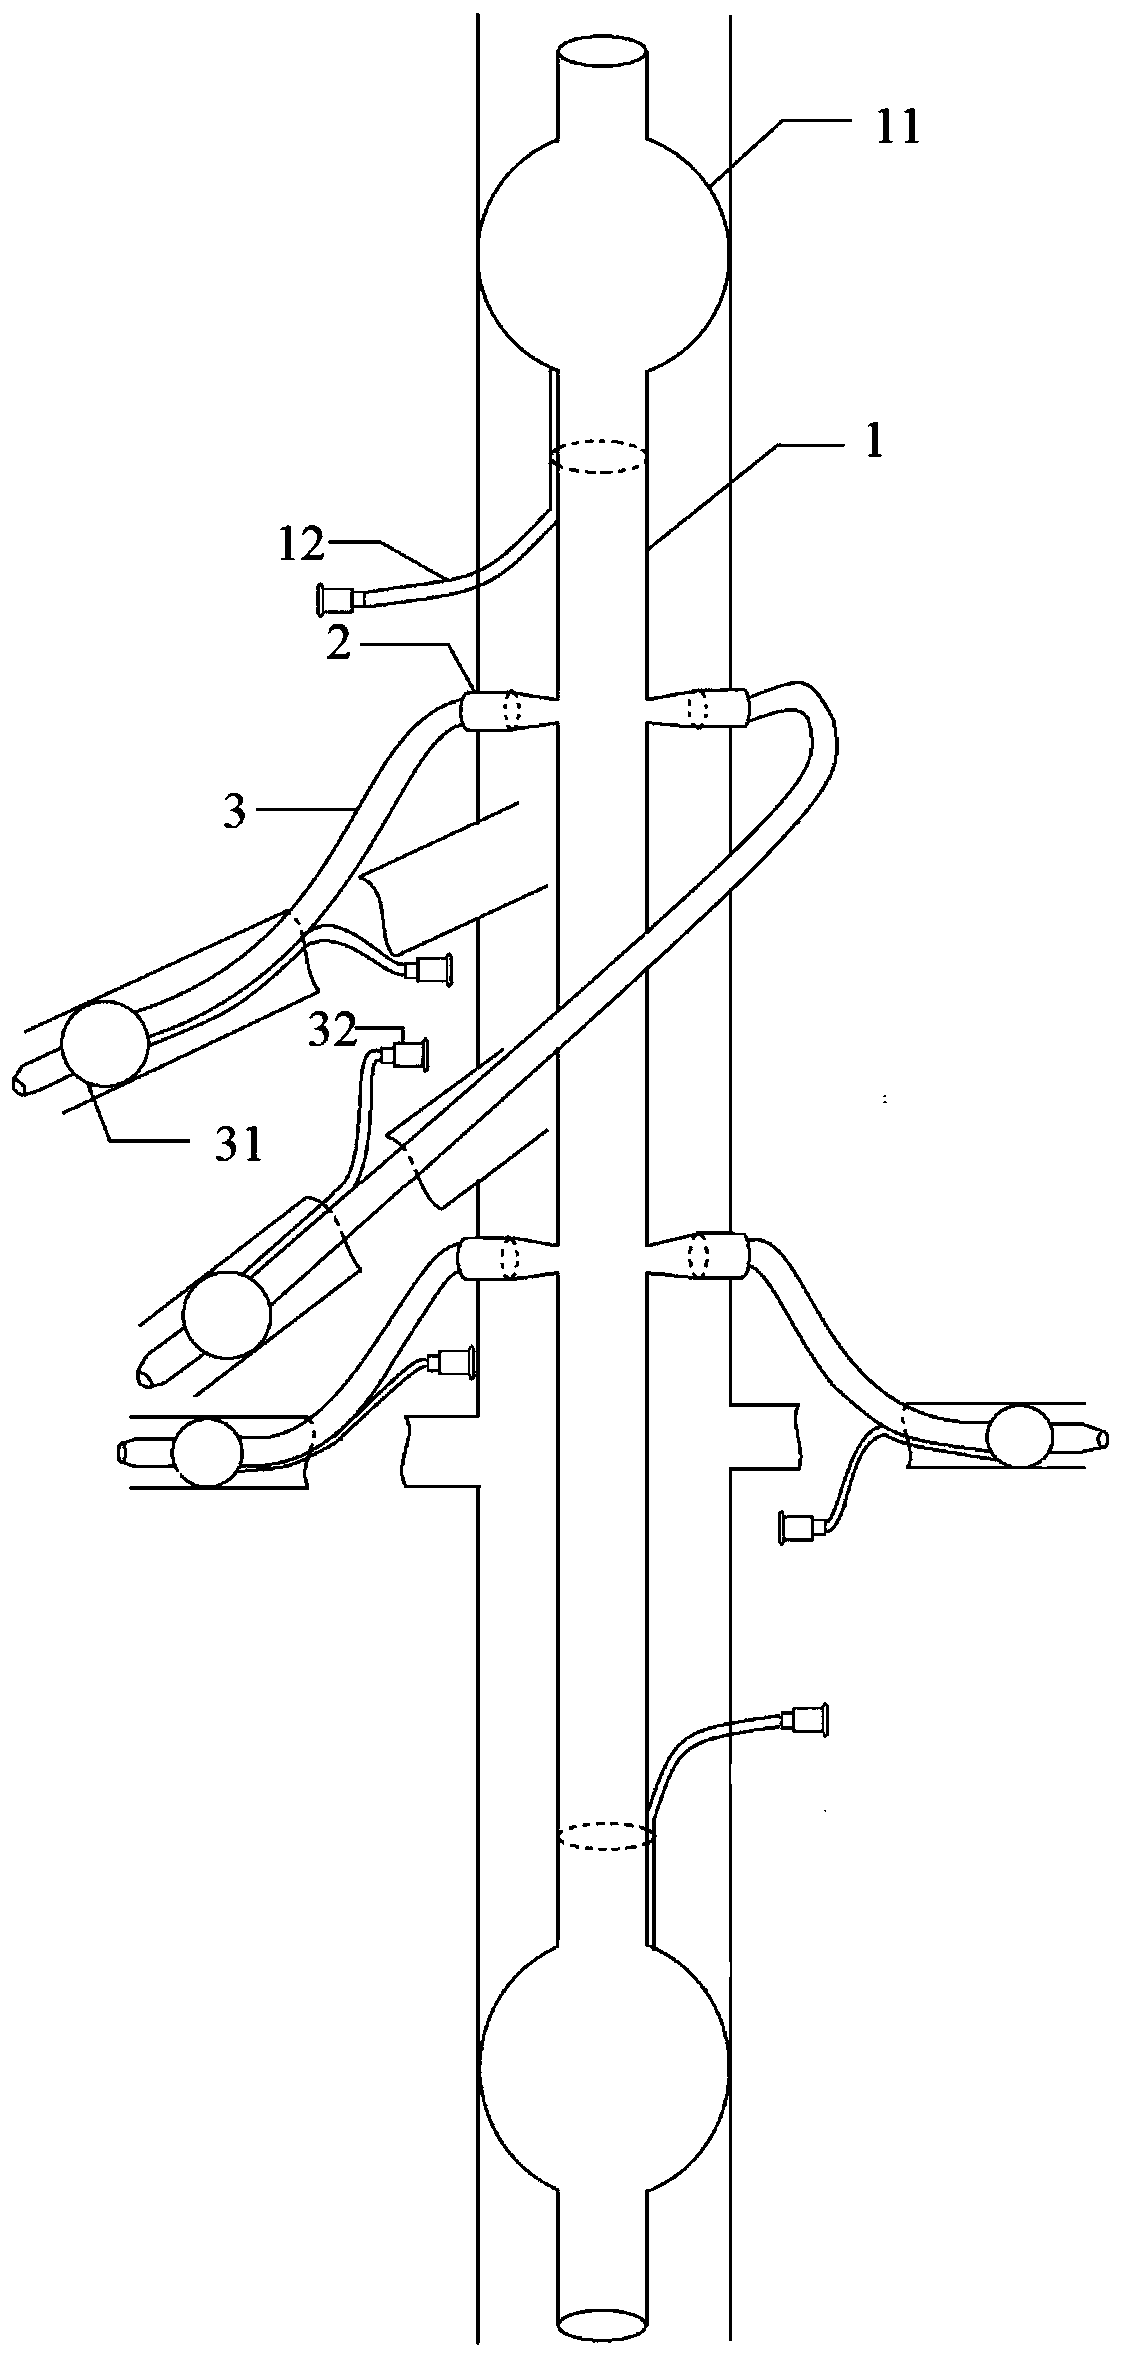 Intra-cavity circulation tube for maintaining artery blood supply of abdominal cavity internal organs